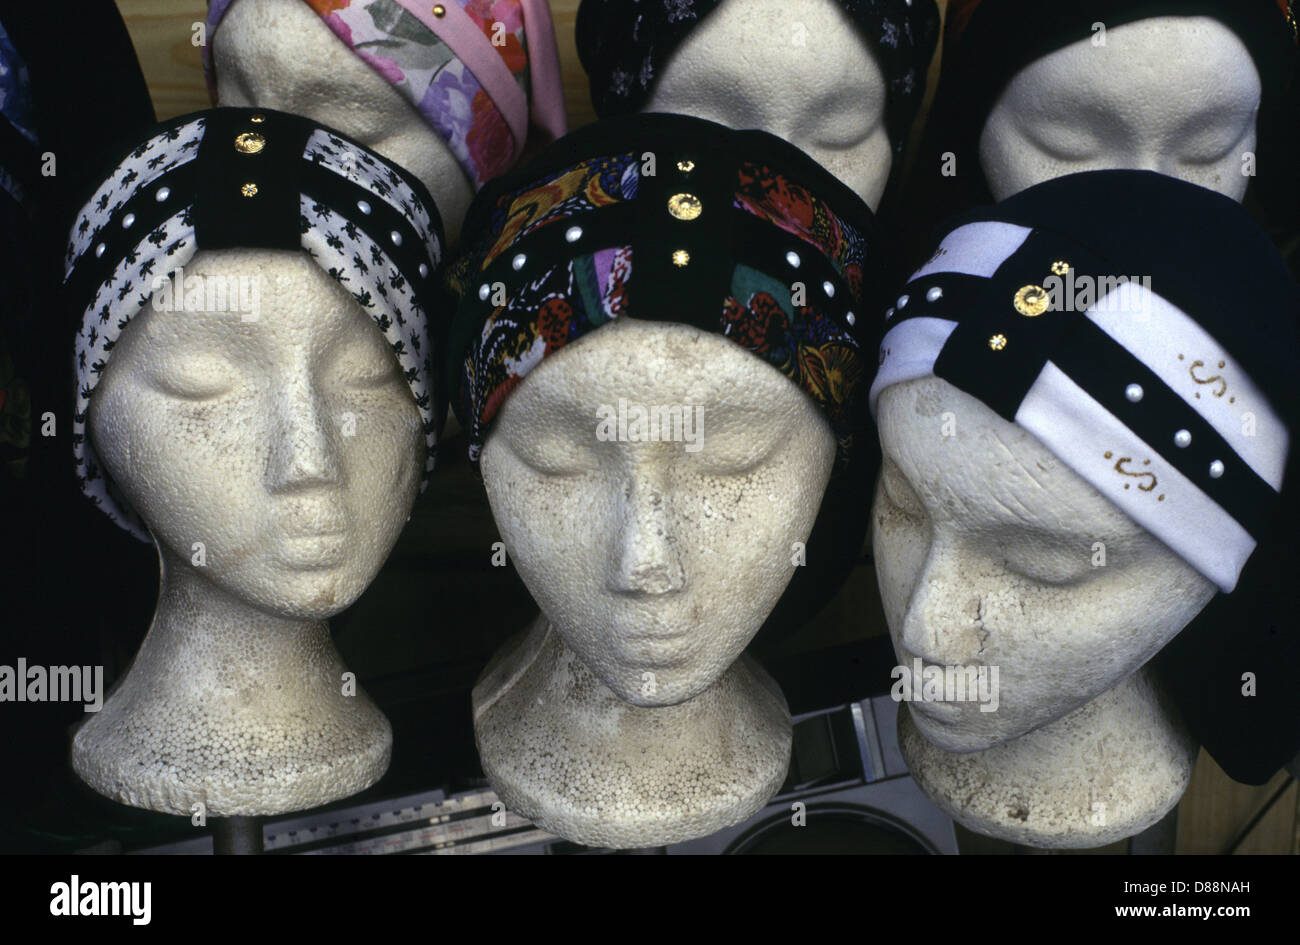 Manikins with traditional hair covers for Ultra Orthodox Jewish women in  Mea Shearim neighborhood, an ultra-Orthodox enclave in West Jerusalem  Israel Stock Photo - Alamy